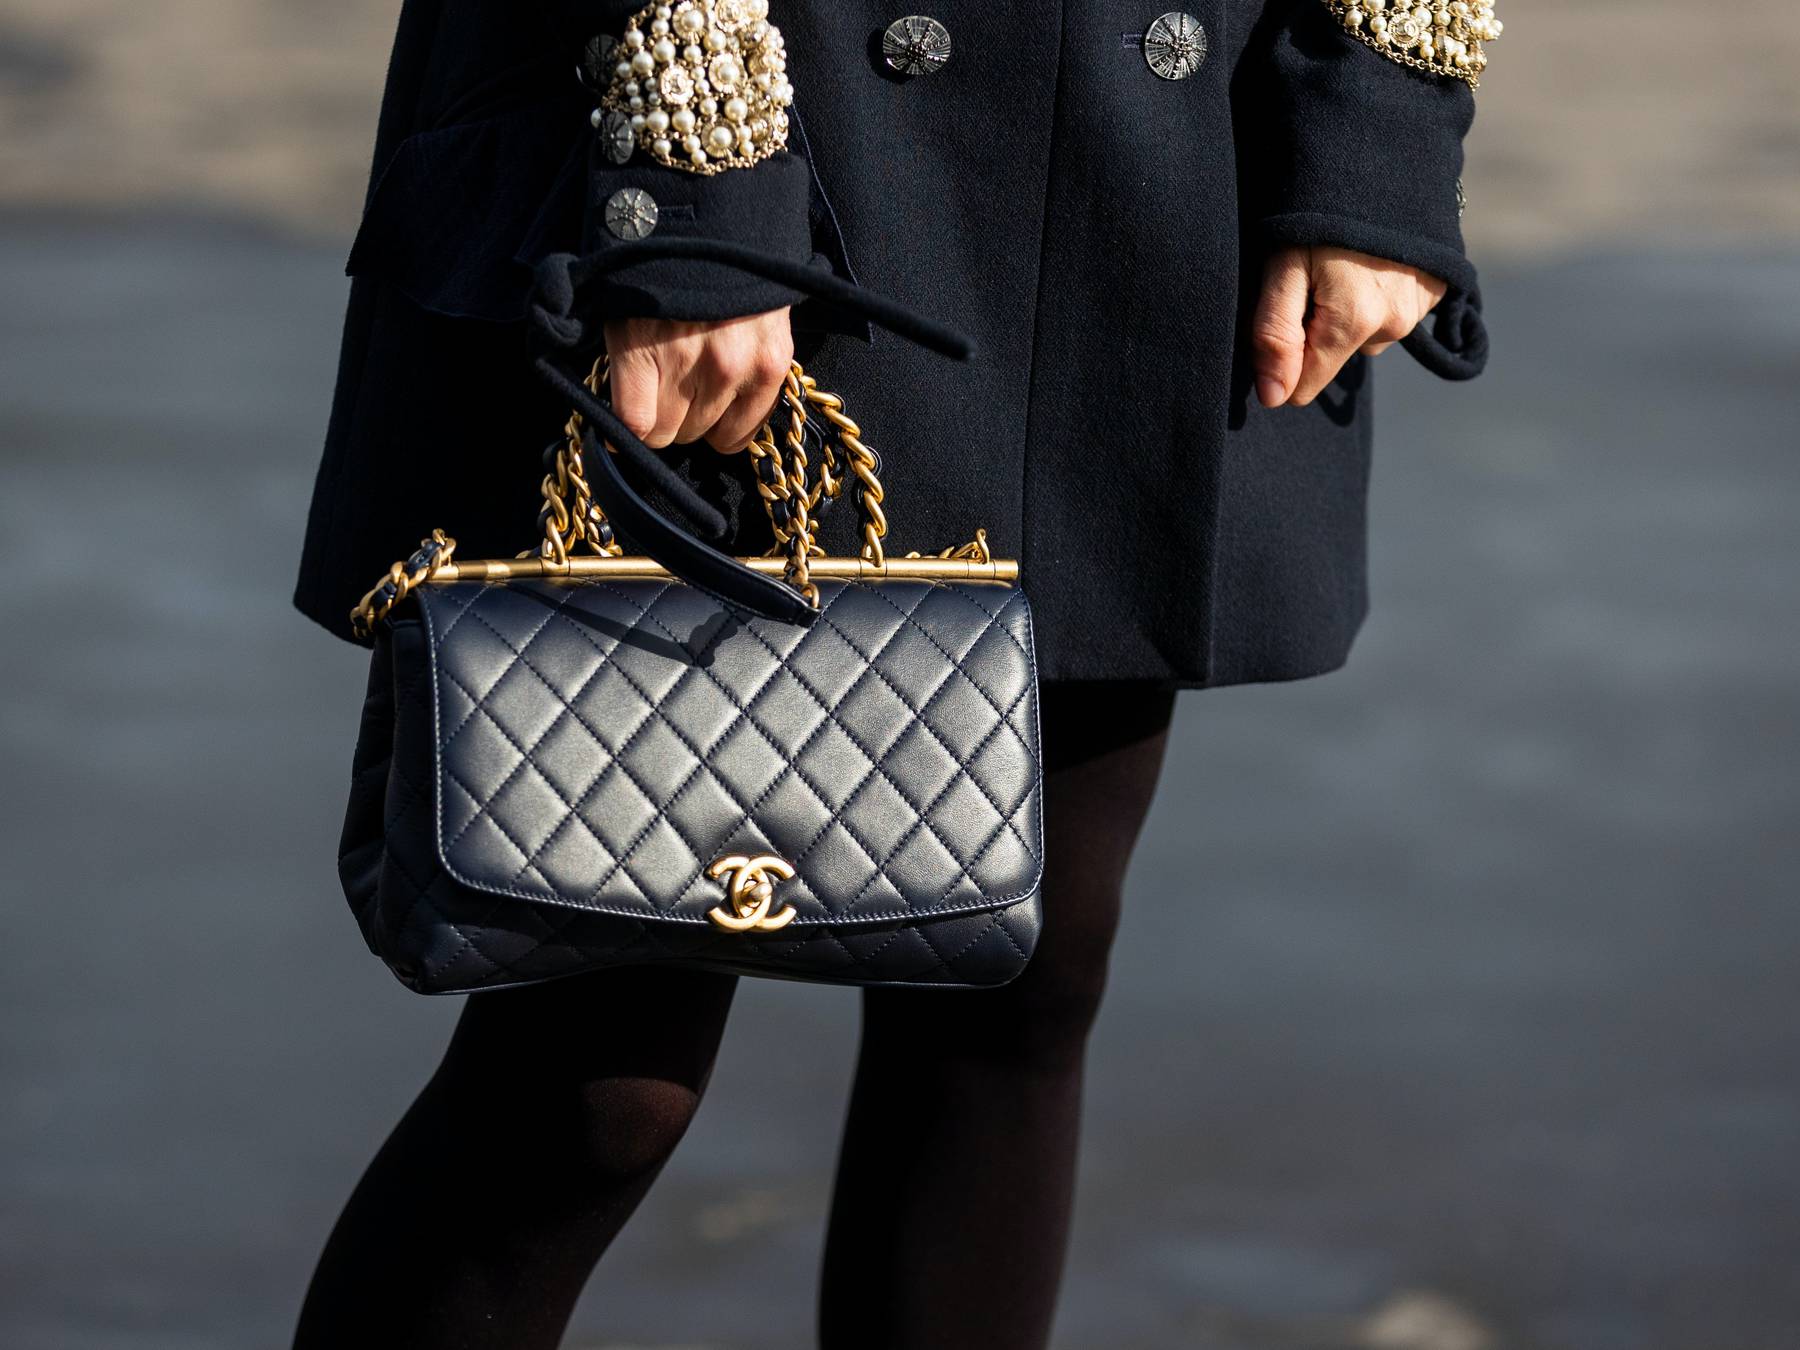 Gucci handbags prices to rise after Louis Vuitton and Chanel Luxus